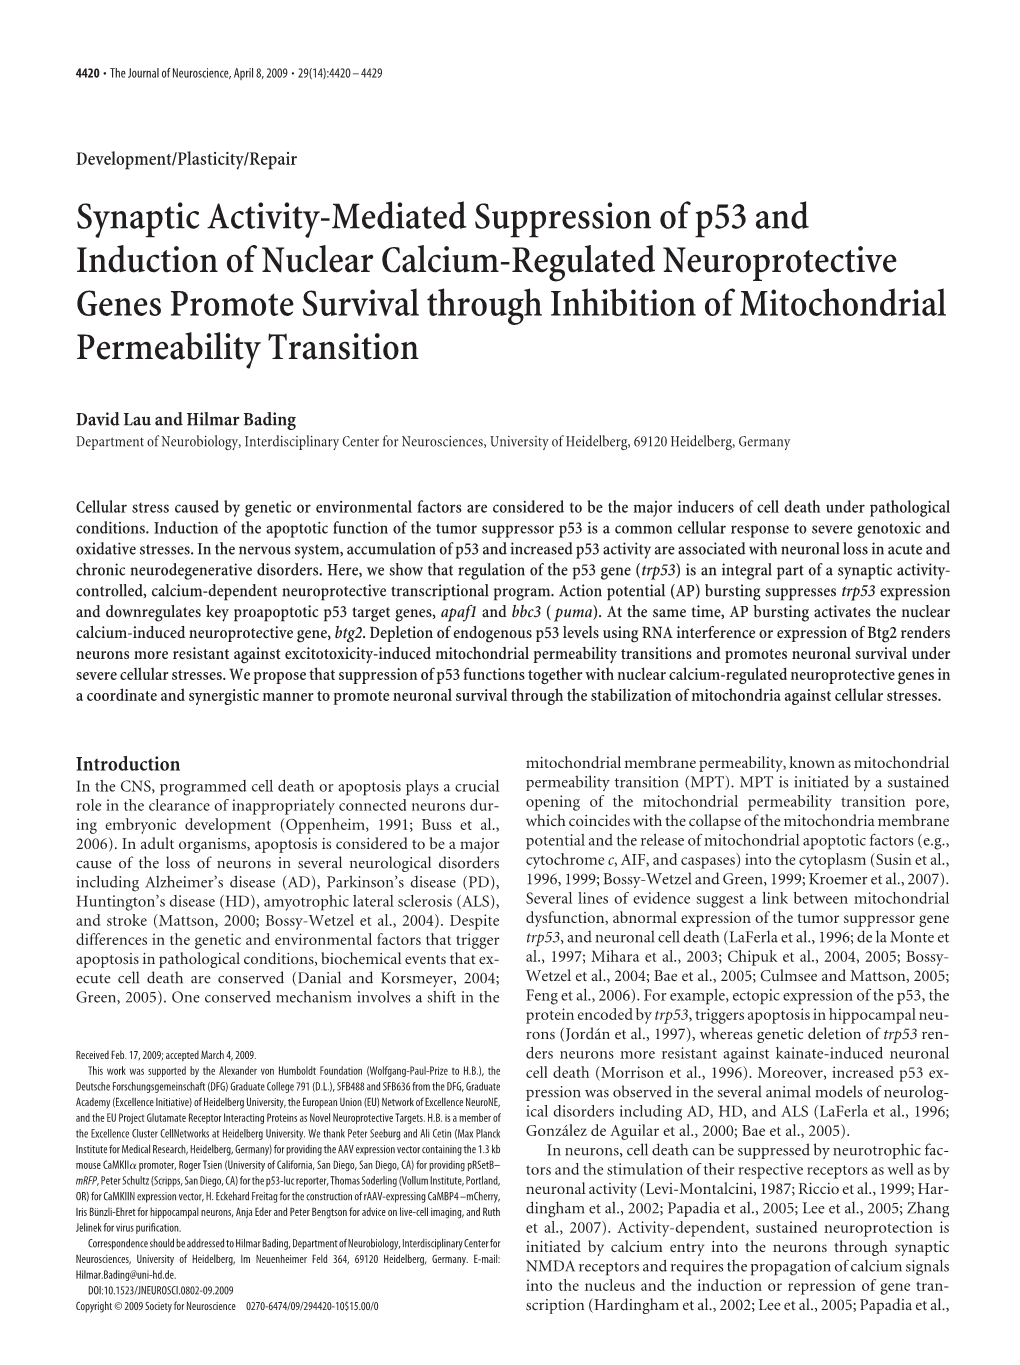 Synaptic Activity-Mediated Suppression of P53 and Induction